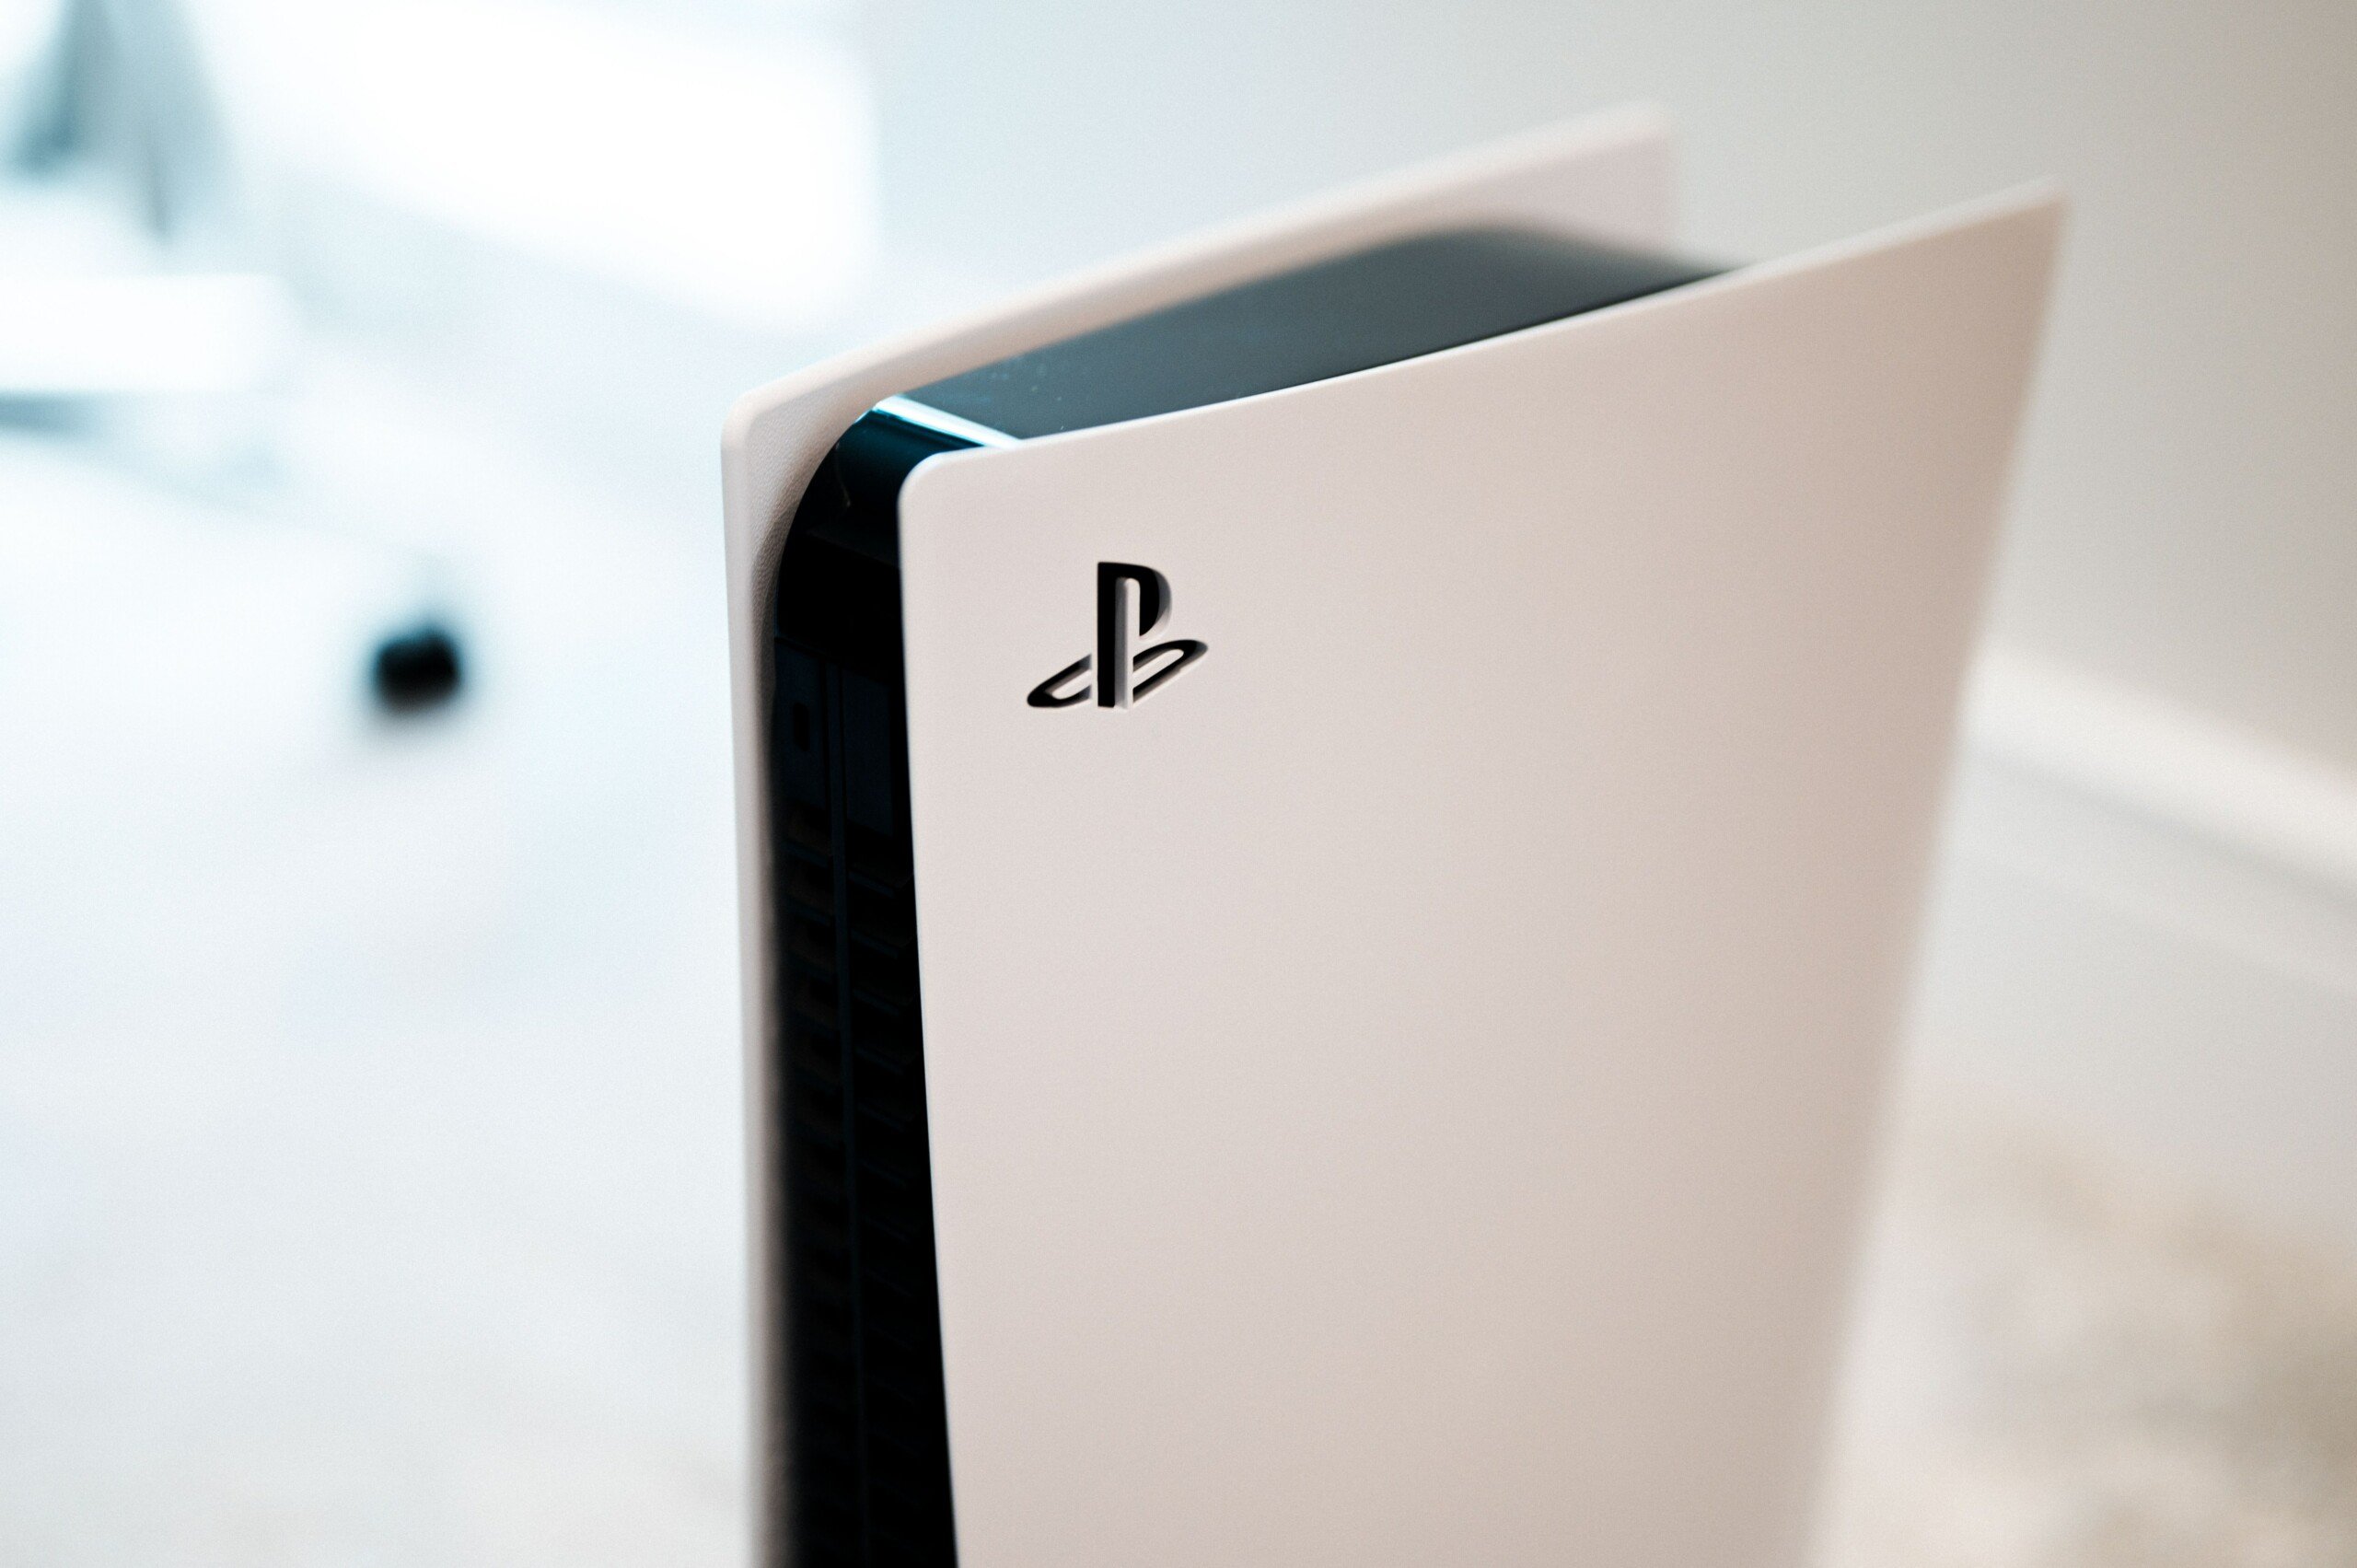 Sony released a new version of the PS5 that is identical to the original with one detail

